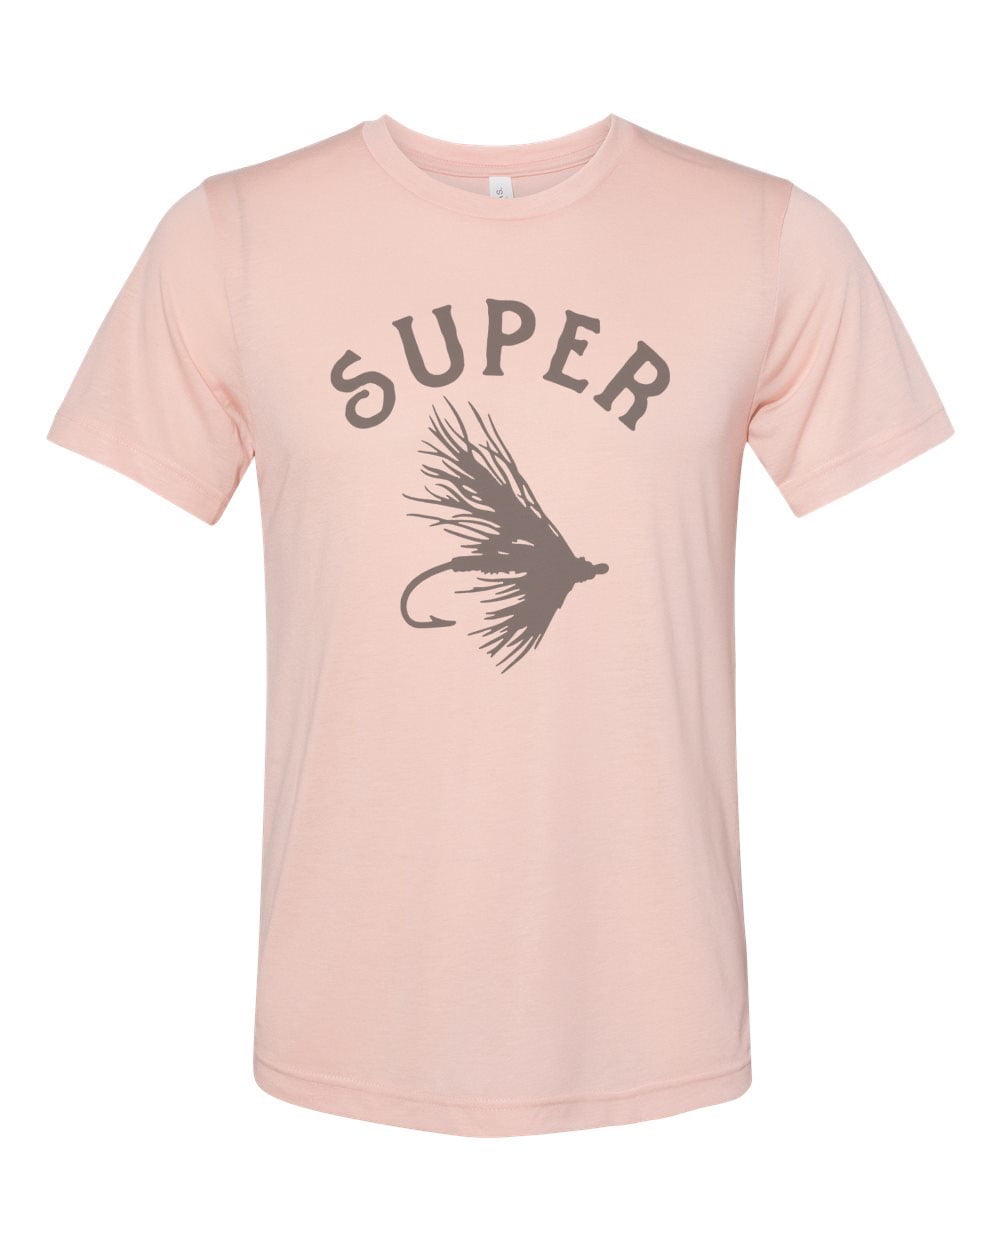 Fly Fishing Shirt, Super Fly, Fly Fishing Apparel, Sublimation T, Unisex  Tee, Fishing Tee, Fishing Shirt, Dad Gift, Trout Fishing Shirt, Peach, Large  